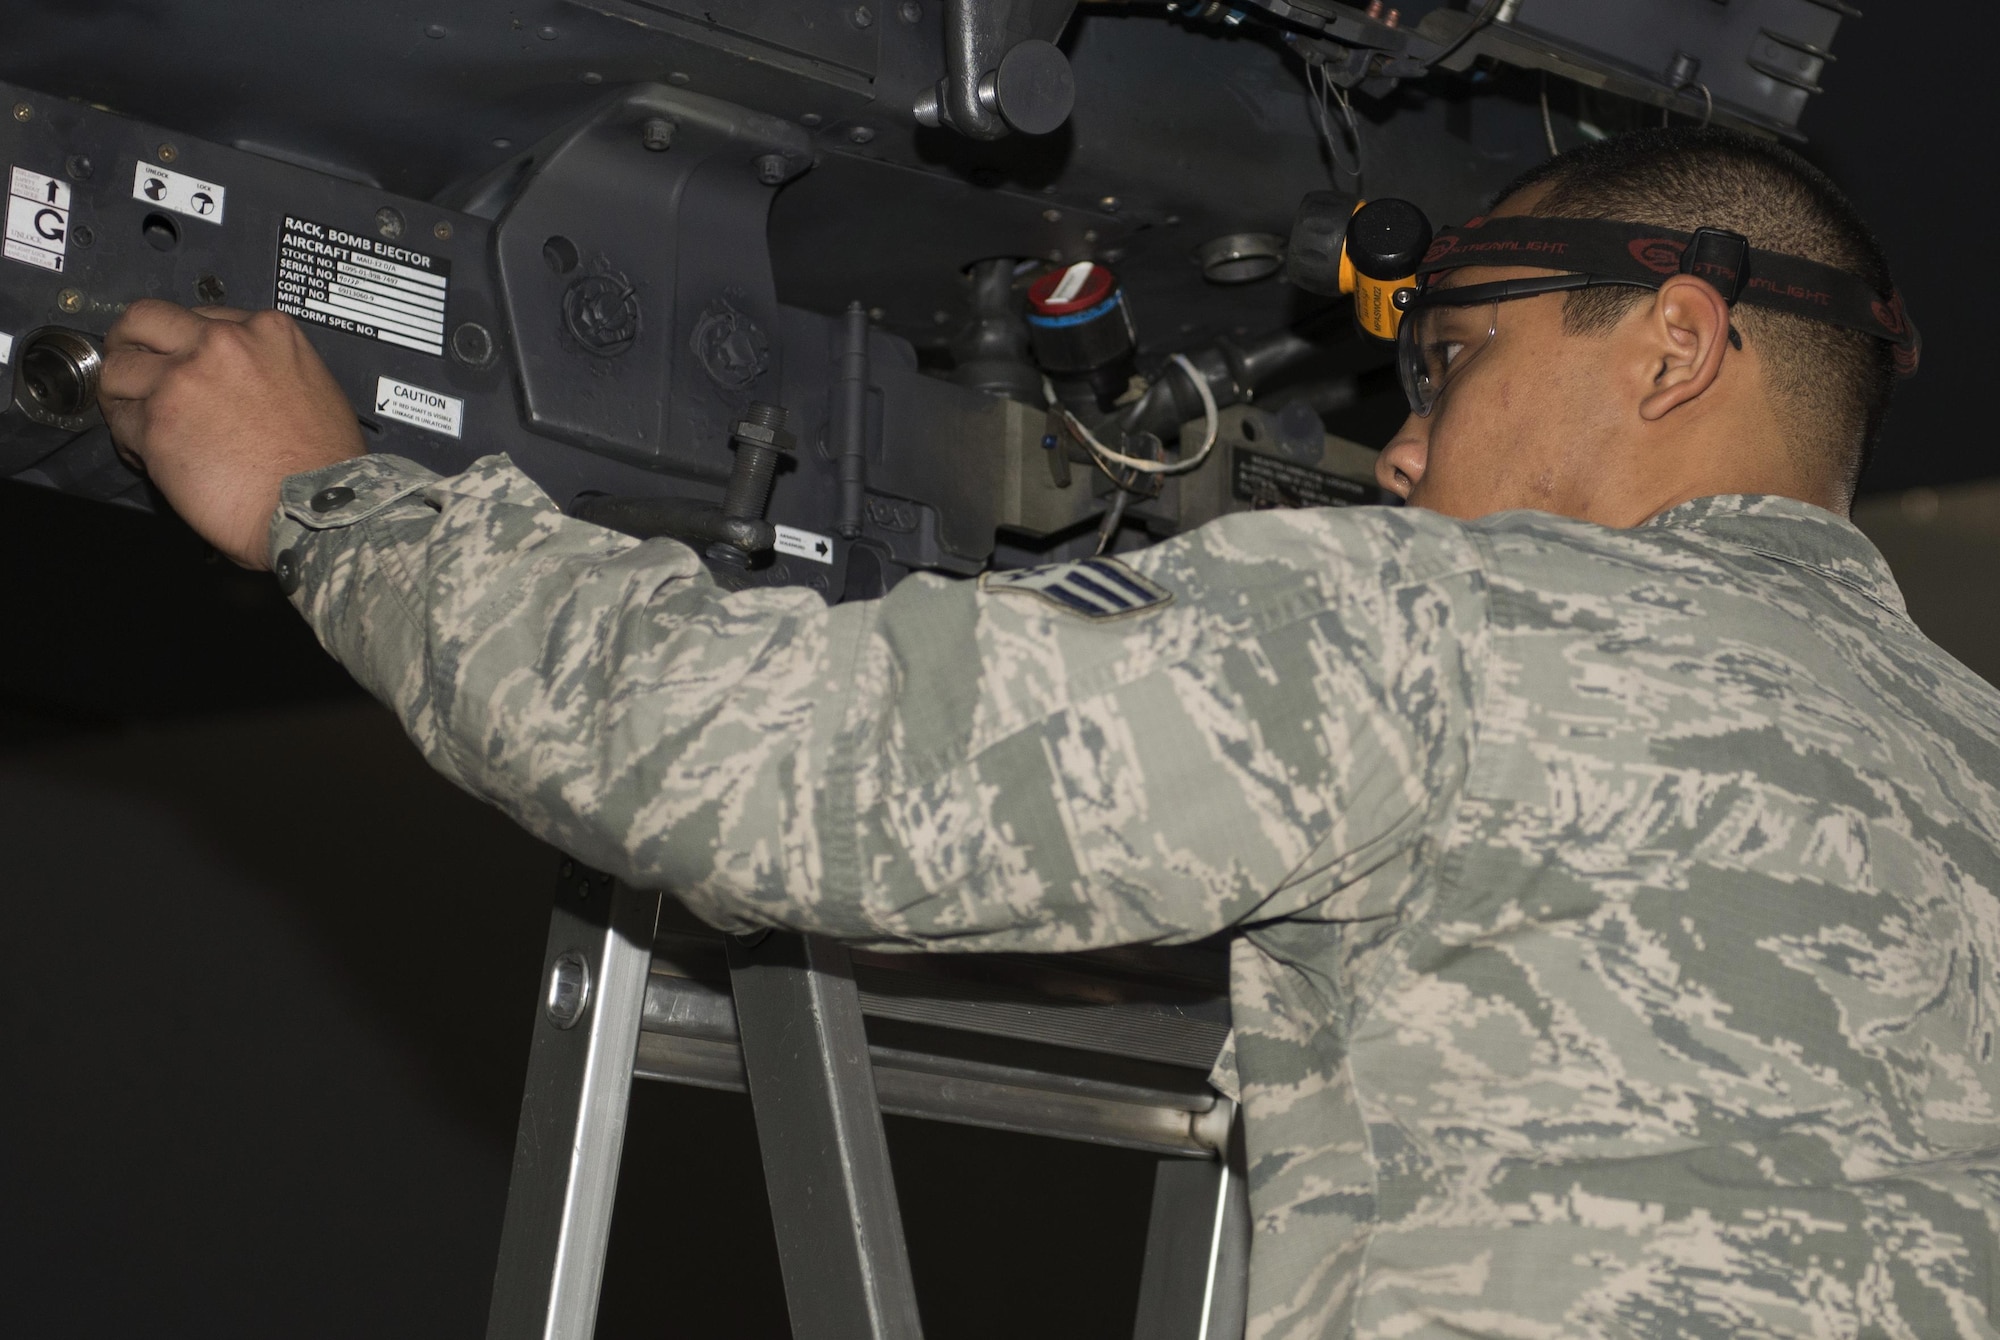 Senior Airman Philip Johnson, 69th Aircraft Maintenance Unit weapons load crew member, prepares a B-52H Stratofortress bomb rack during the 5th Bomb Wing Load Crew of the Quarter competition in Dock 7 at Minot Air Force Base, N.D., Jan. 20, 2017. Representative weapons load crews were made up of teams of four for the competition. (U.S. Air Force photo/Airman 1st Class Alyssa M. Akers)